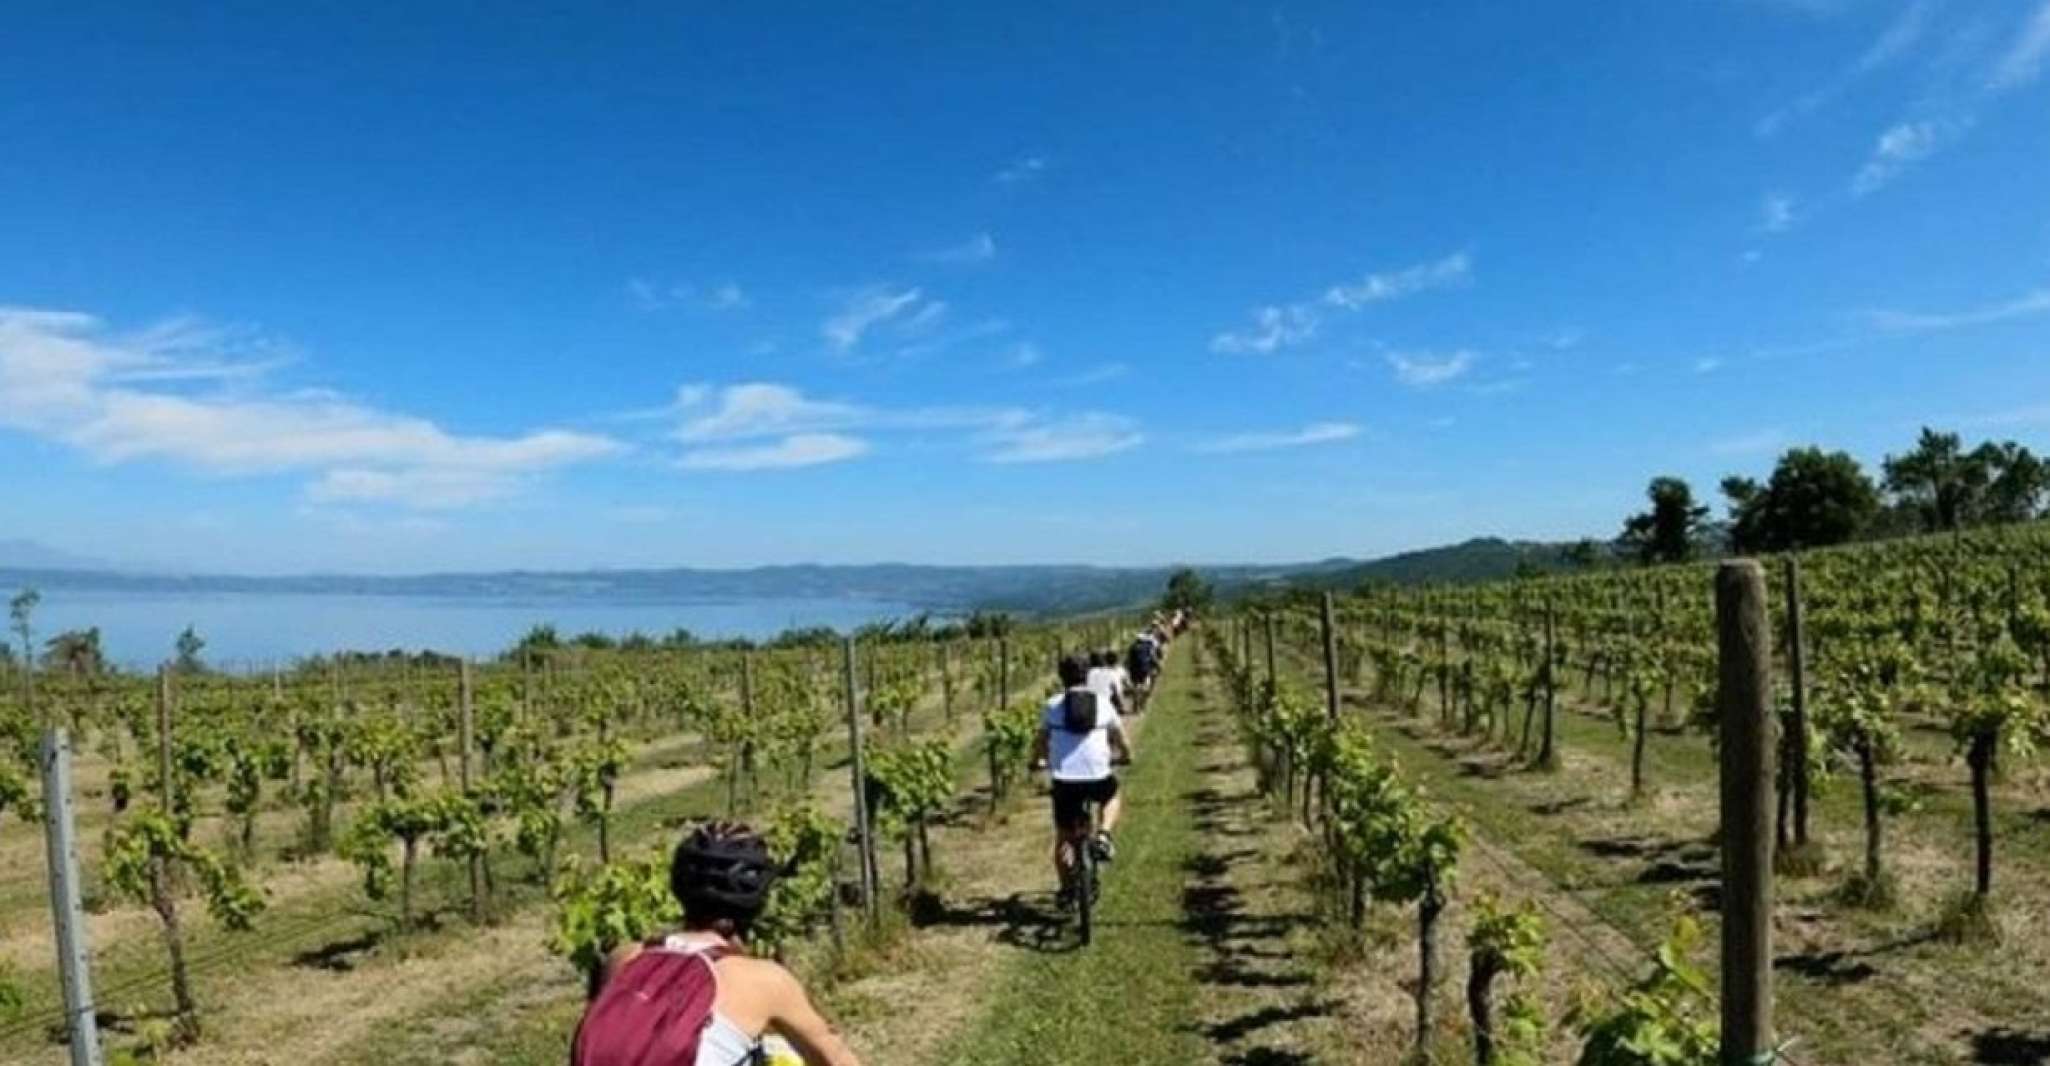 Valle del Lago, eBike tour with Food&Wine tasting experience - Housity